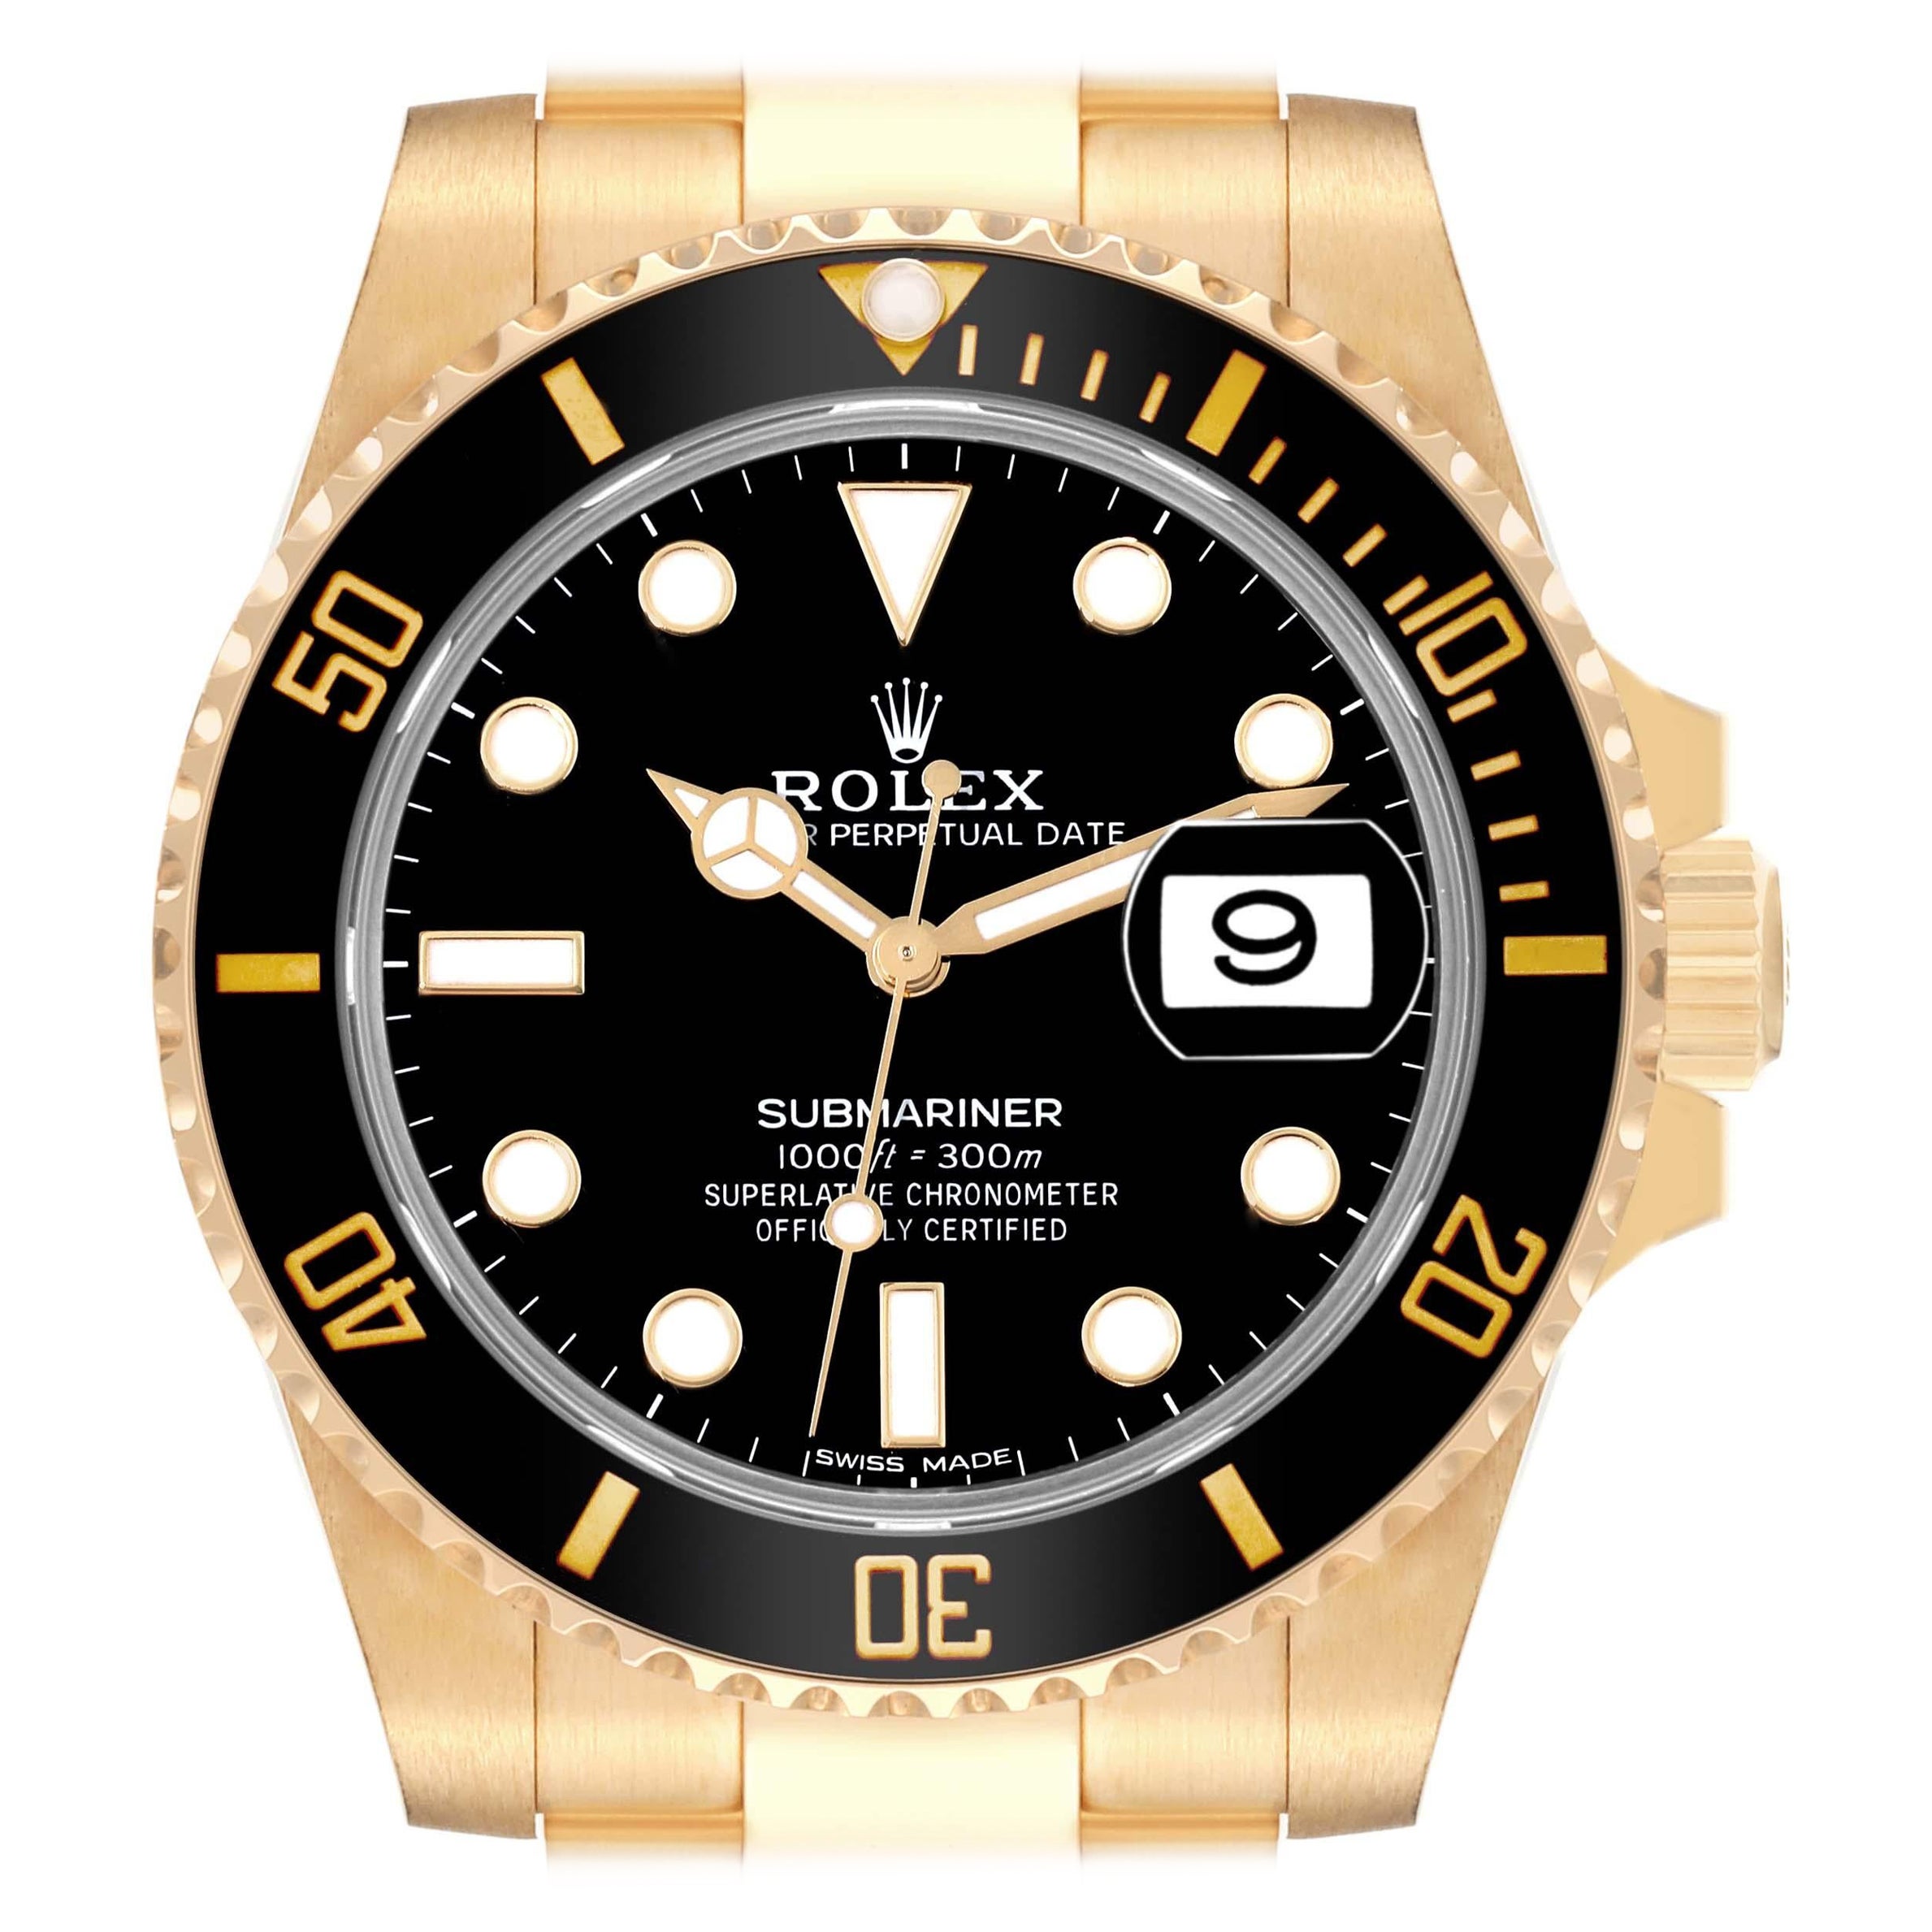 Rolex Submariner Black Dial Yellow Gold Mens Watch 116618 Box Card For Sale